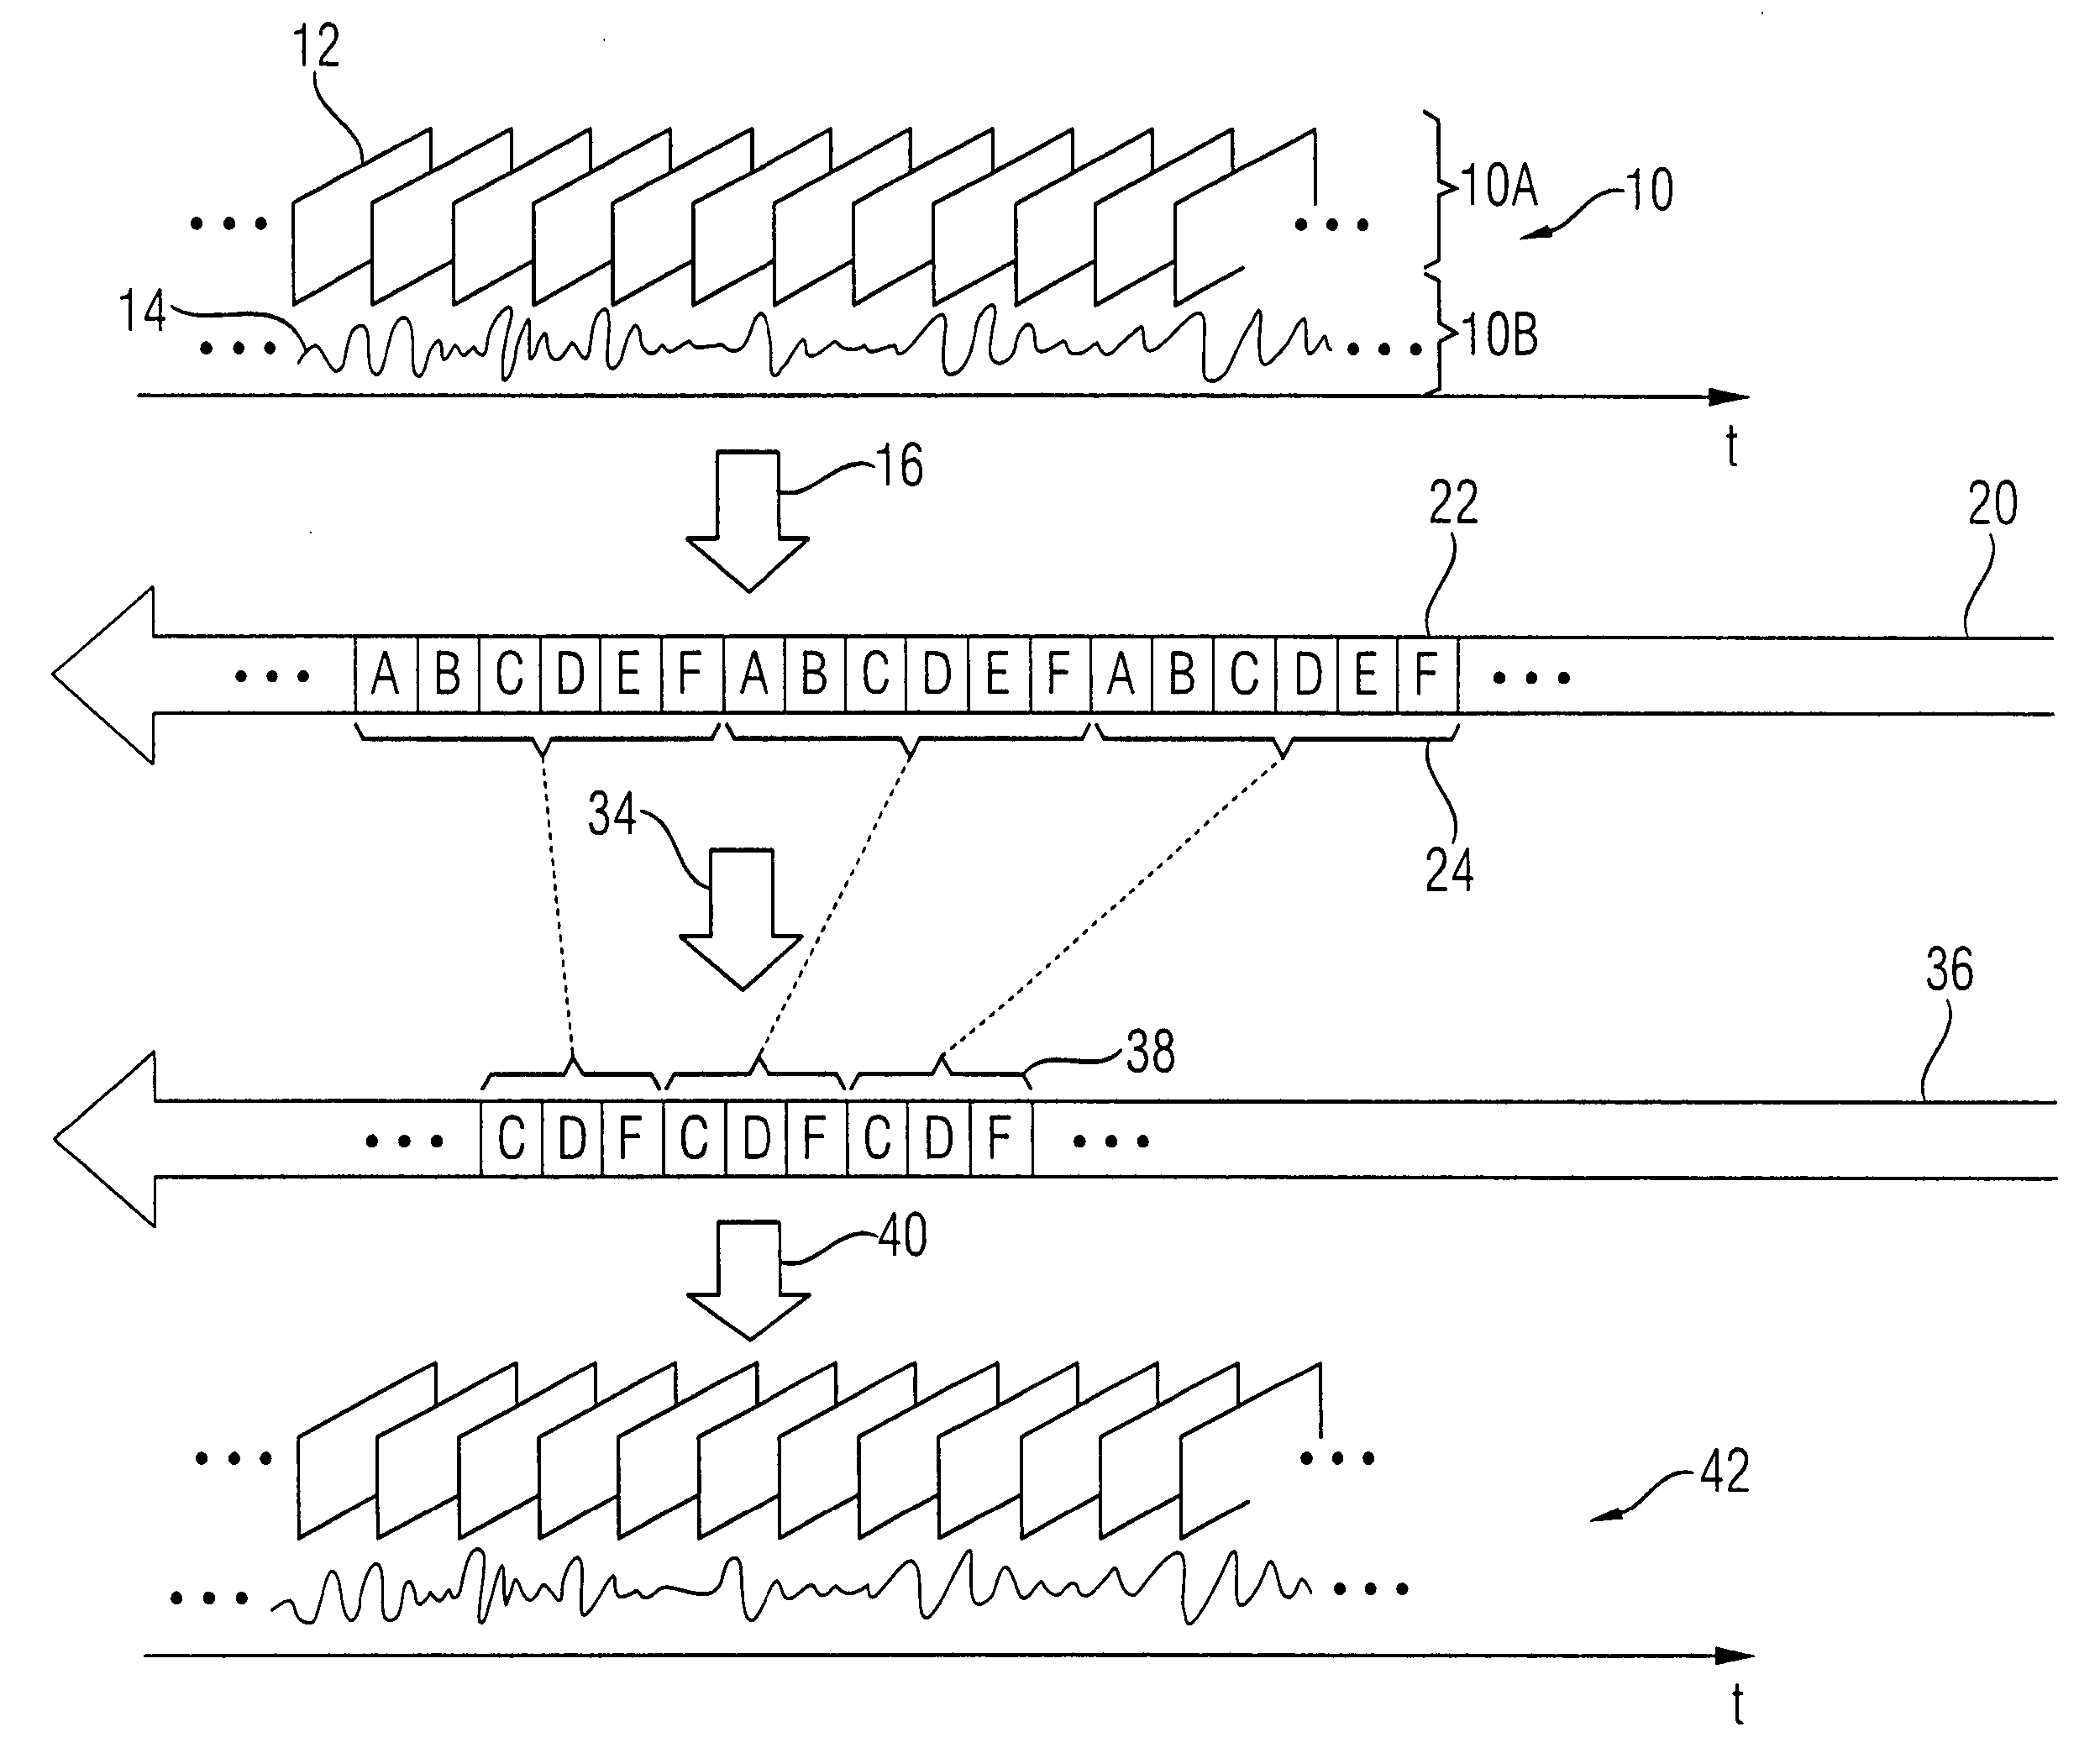 Apparatus and method for coding an information signal into a data stream, converting the data stream and decoding the data stream